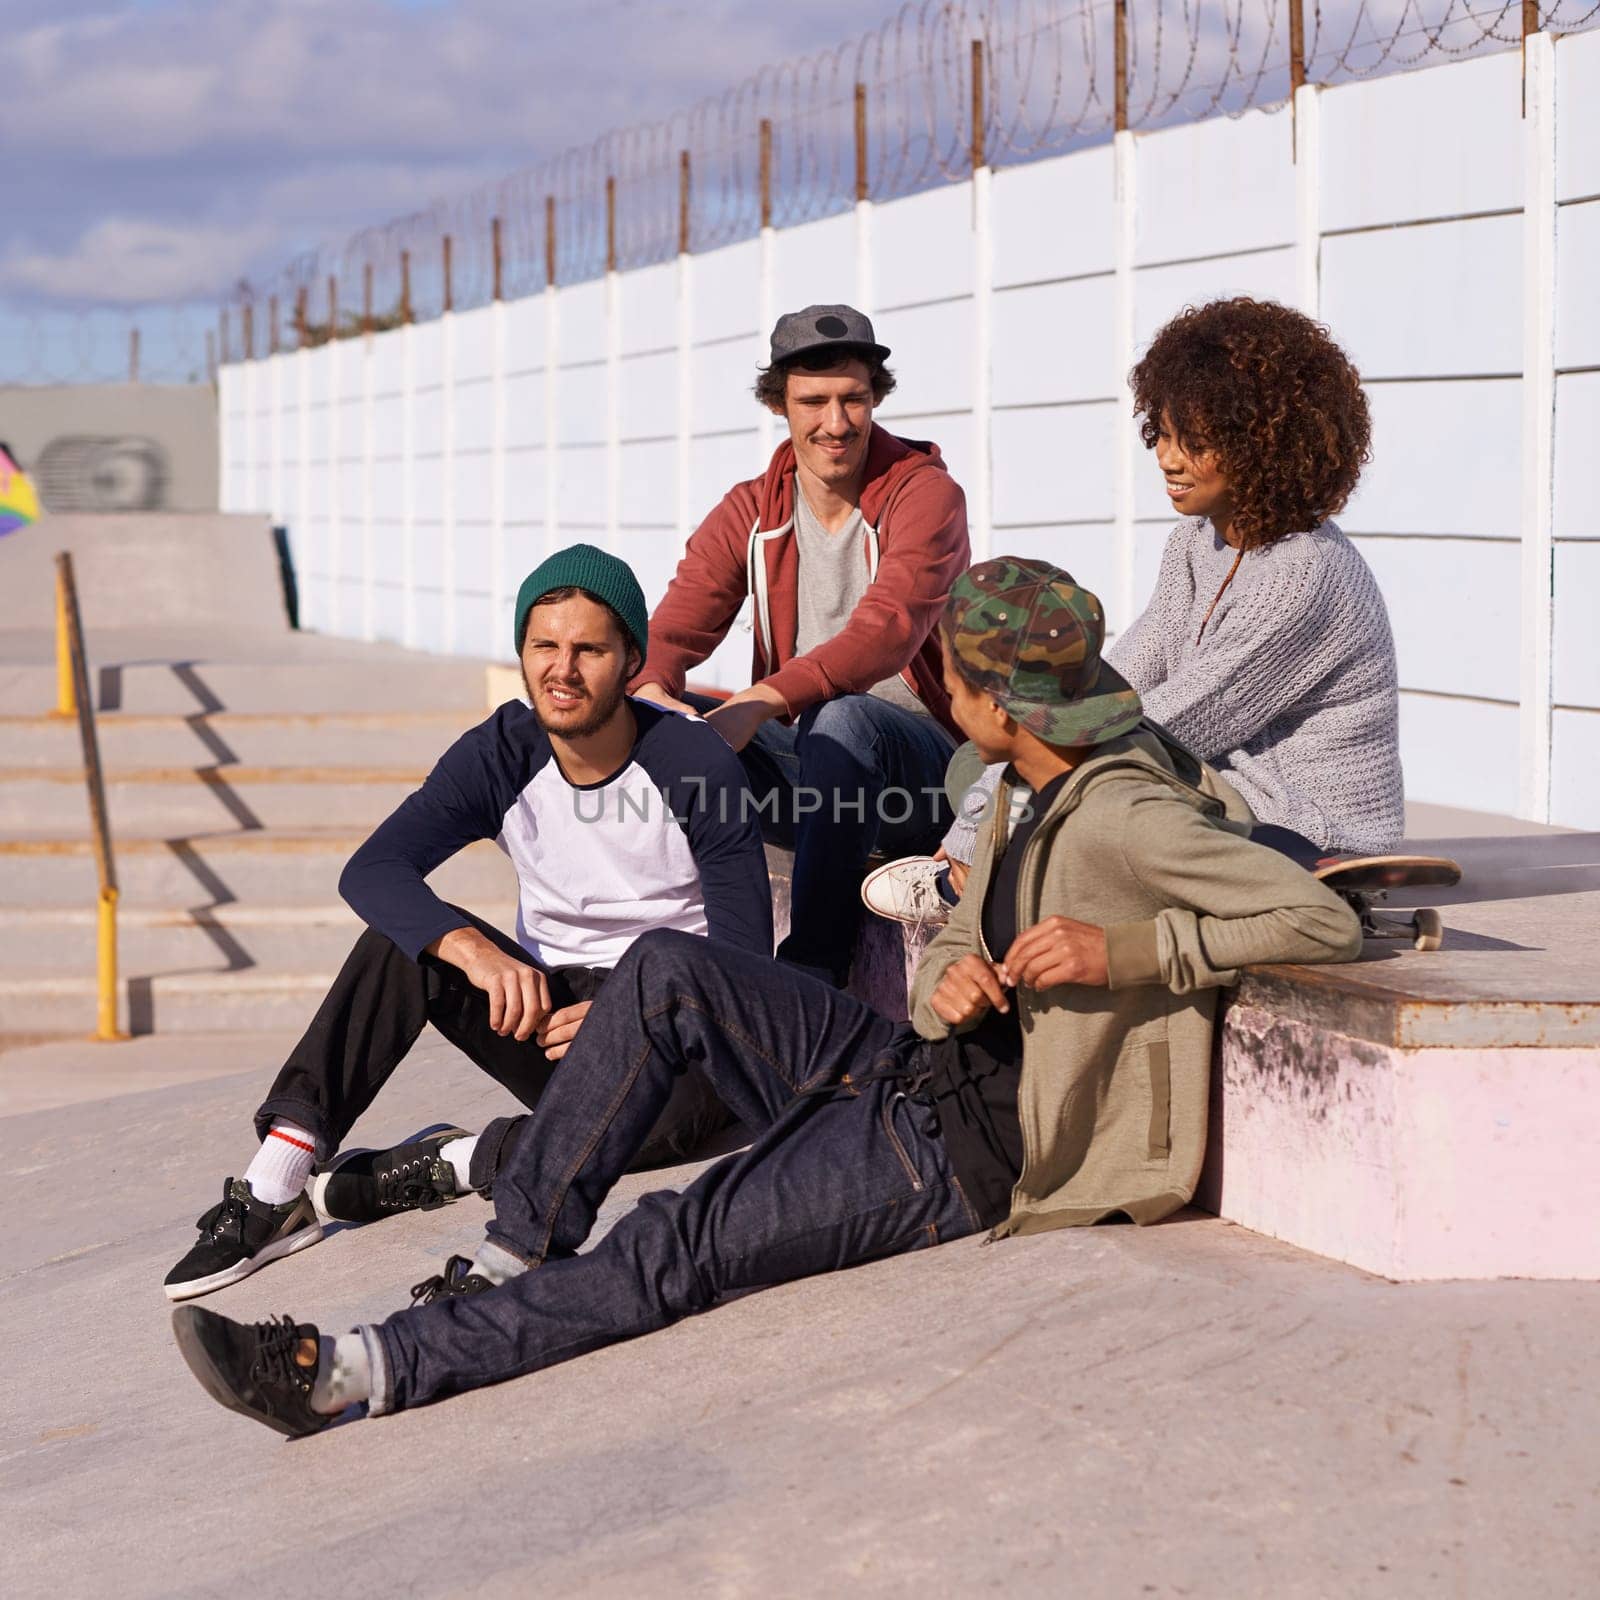 Skate park, diversity and group with conversation, sunshine and relaxing after training for competition. Multiracial, friends and team on a break, summer and bonding together with skaters in a park.